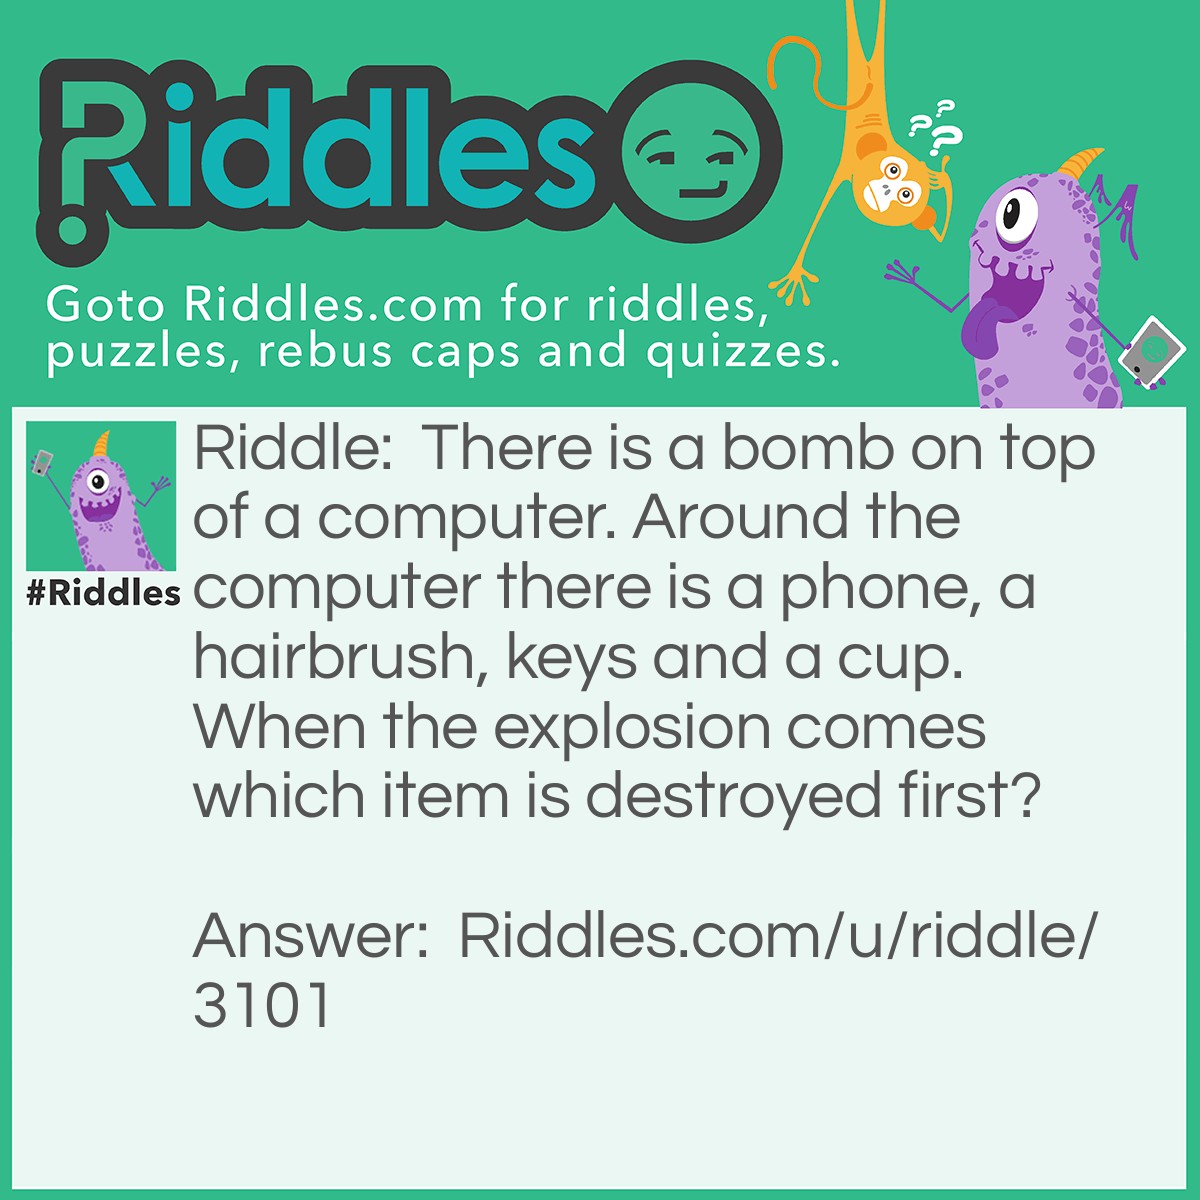 Riddle: There is a bomb on top of a computer. Around the computer there is a phone, a hairbrush, keys and a cup. When the explosion comes which item is destroyed first? Answer: The bomb.